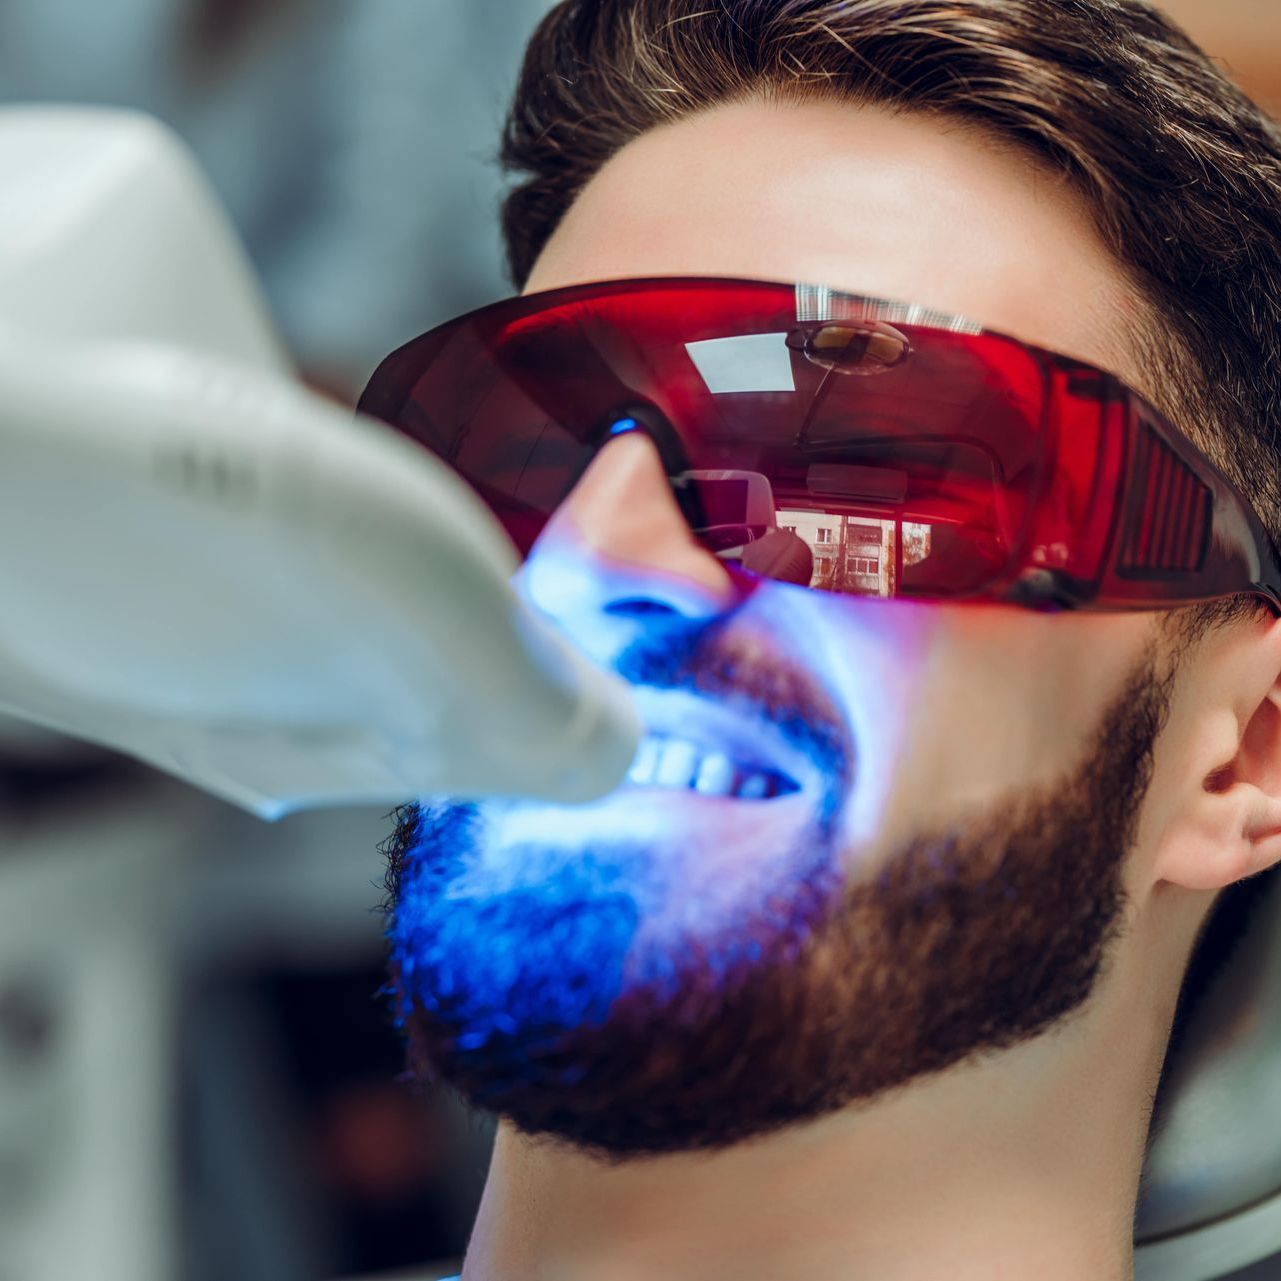 An image of a man wearing goggles during teeth whitening treatment